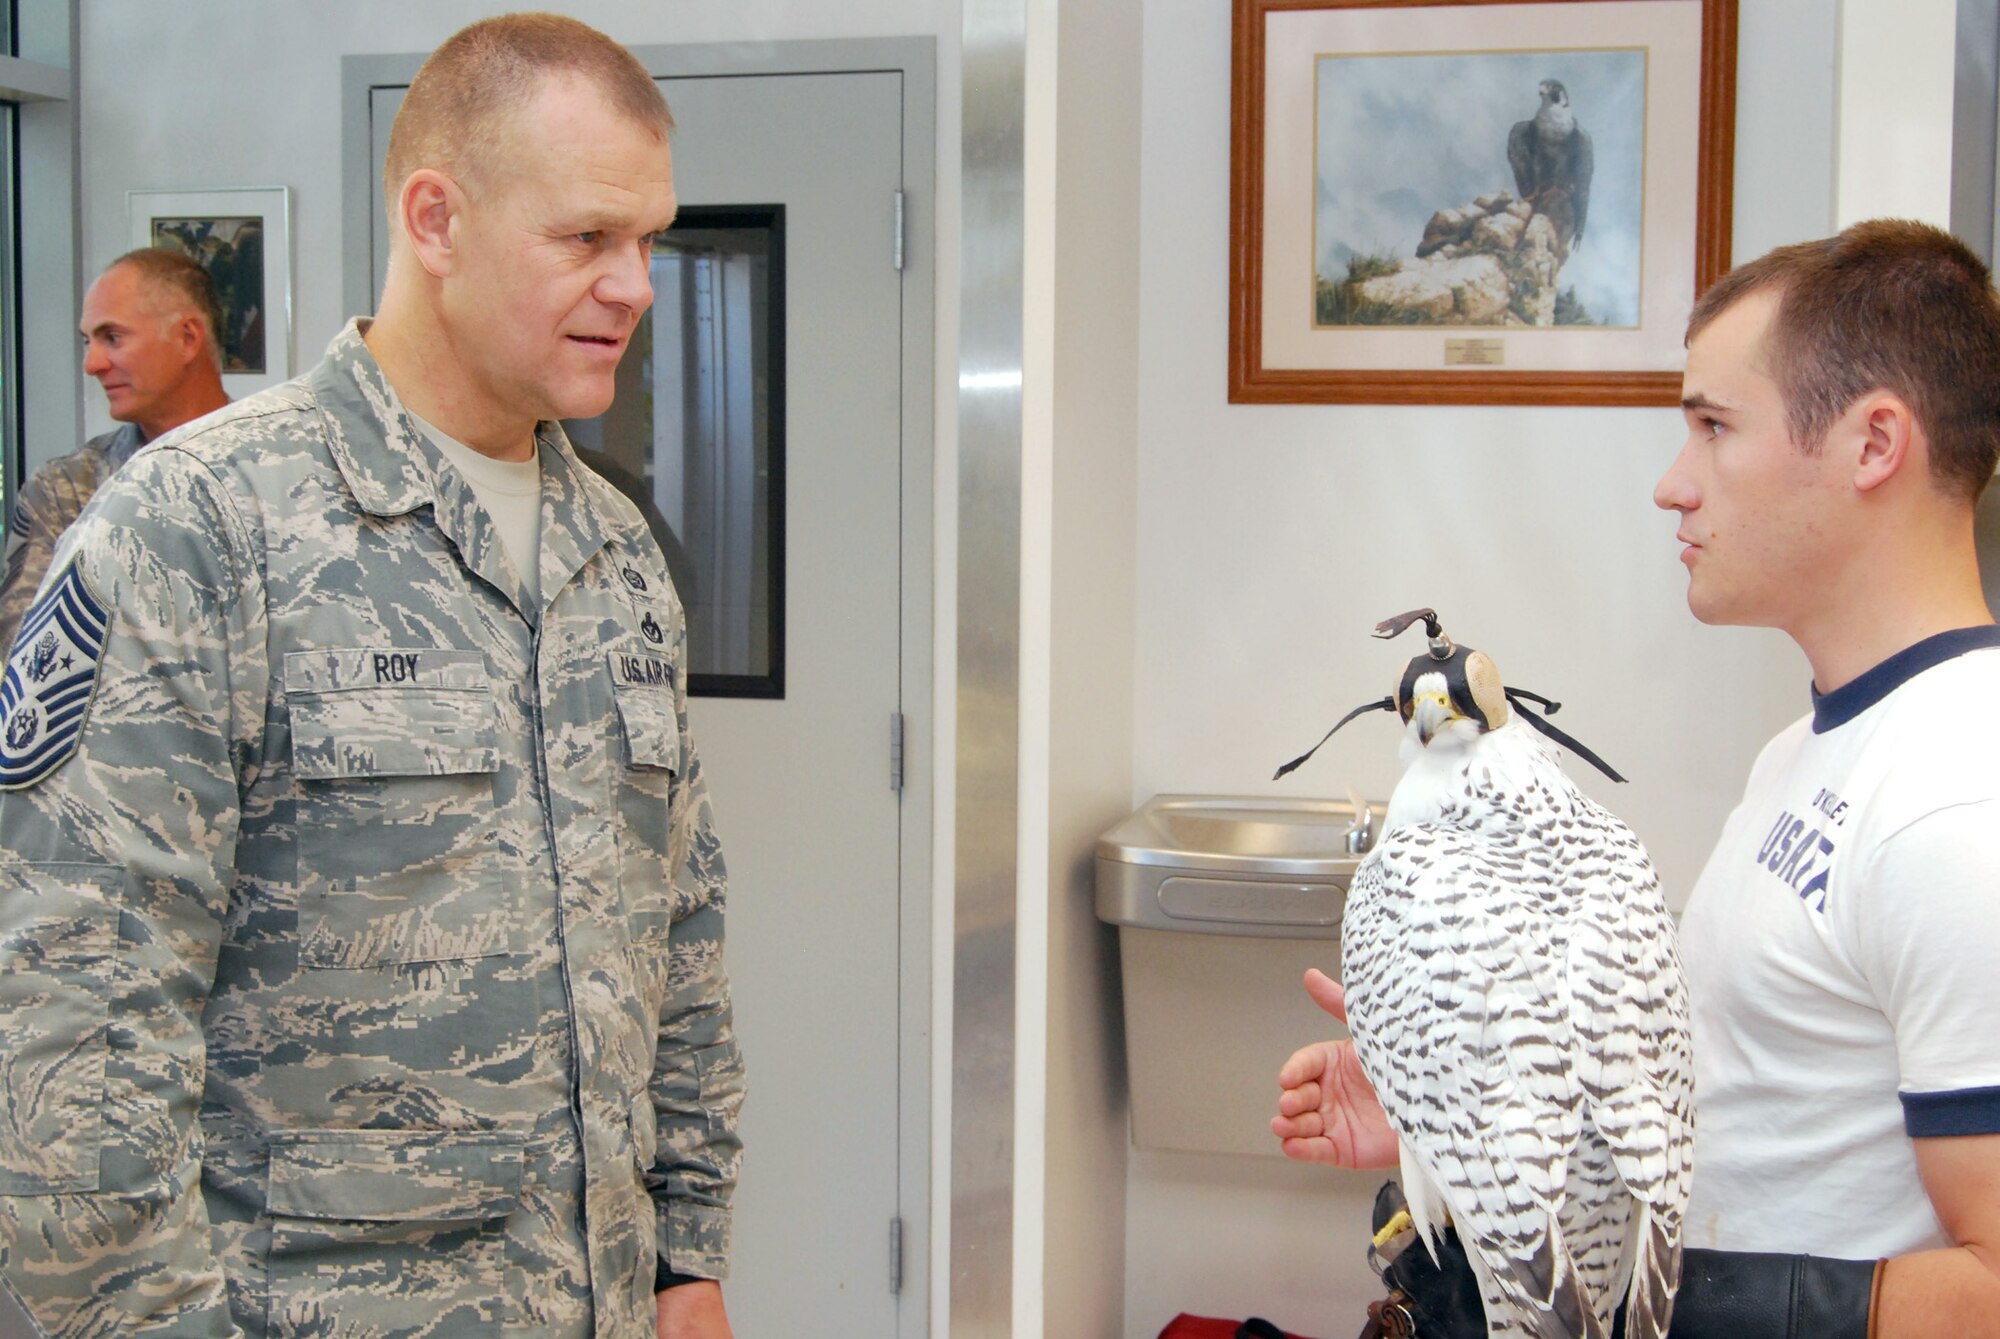 Cadet 2nd Class Michael O'Kelley (right) talks to Chief Master Sgt. of the Air Force James A. Roy about the U.S. Air Force Academy's falconry program during a visit to the Academy. (U.S. Air Force photo/Staff Sgt. Don Branum)